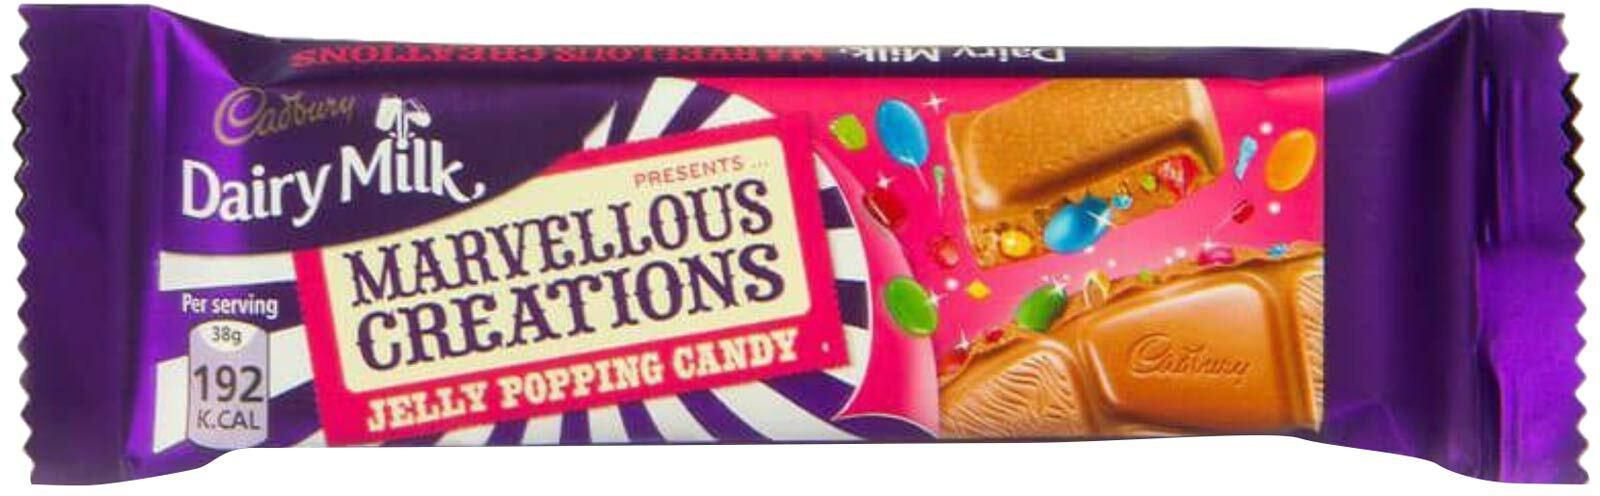 Cadbury Dairy Milk Marvelous Creations Jelly Popping Candy 38g